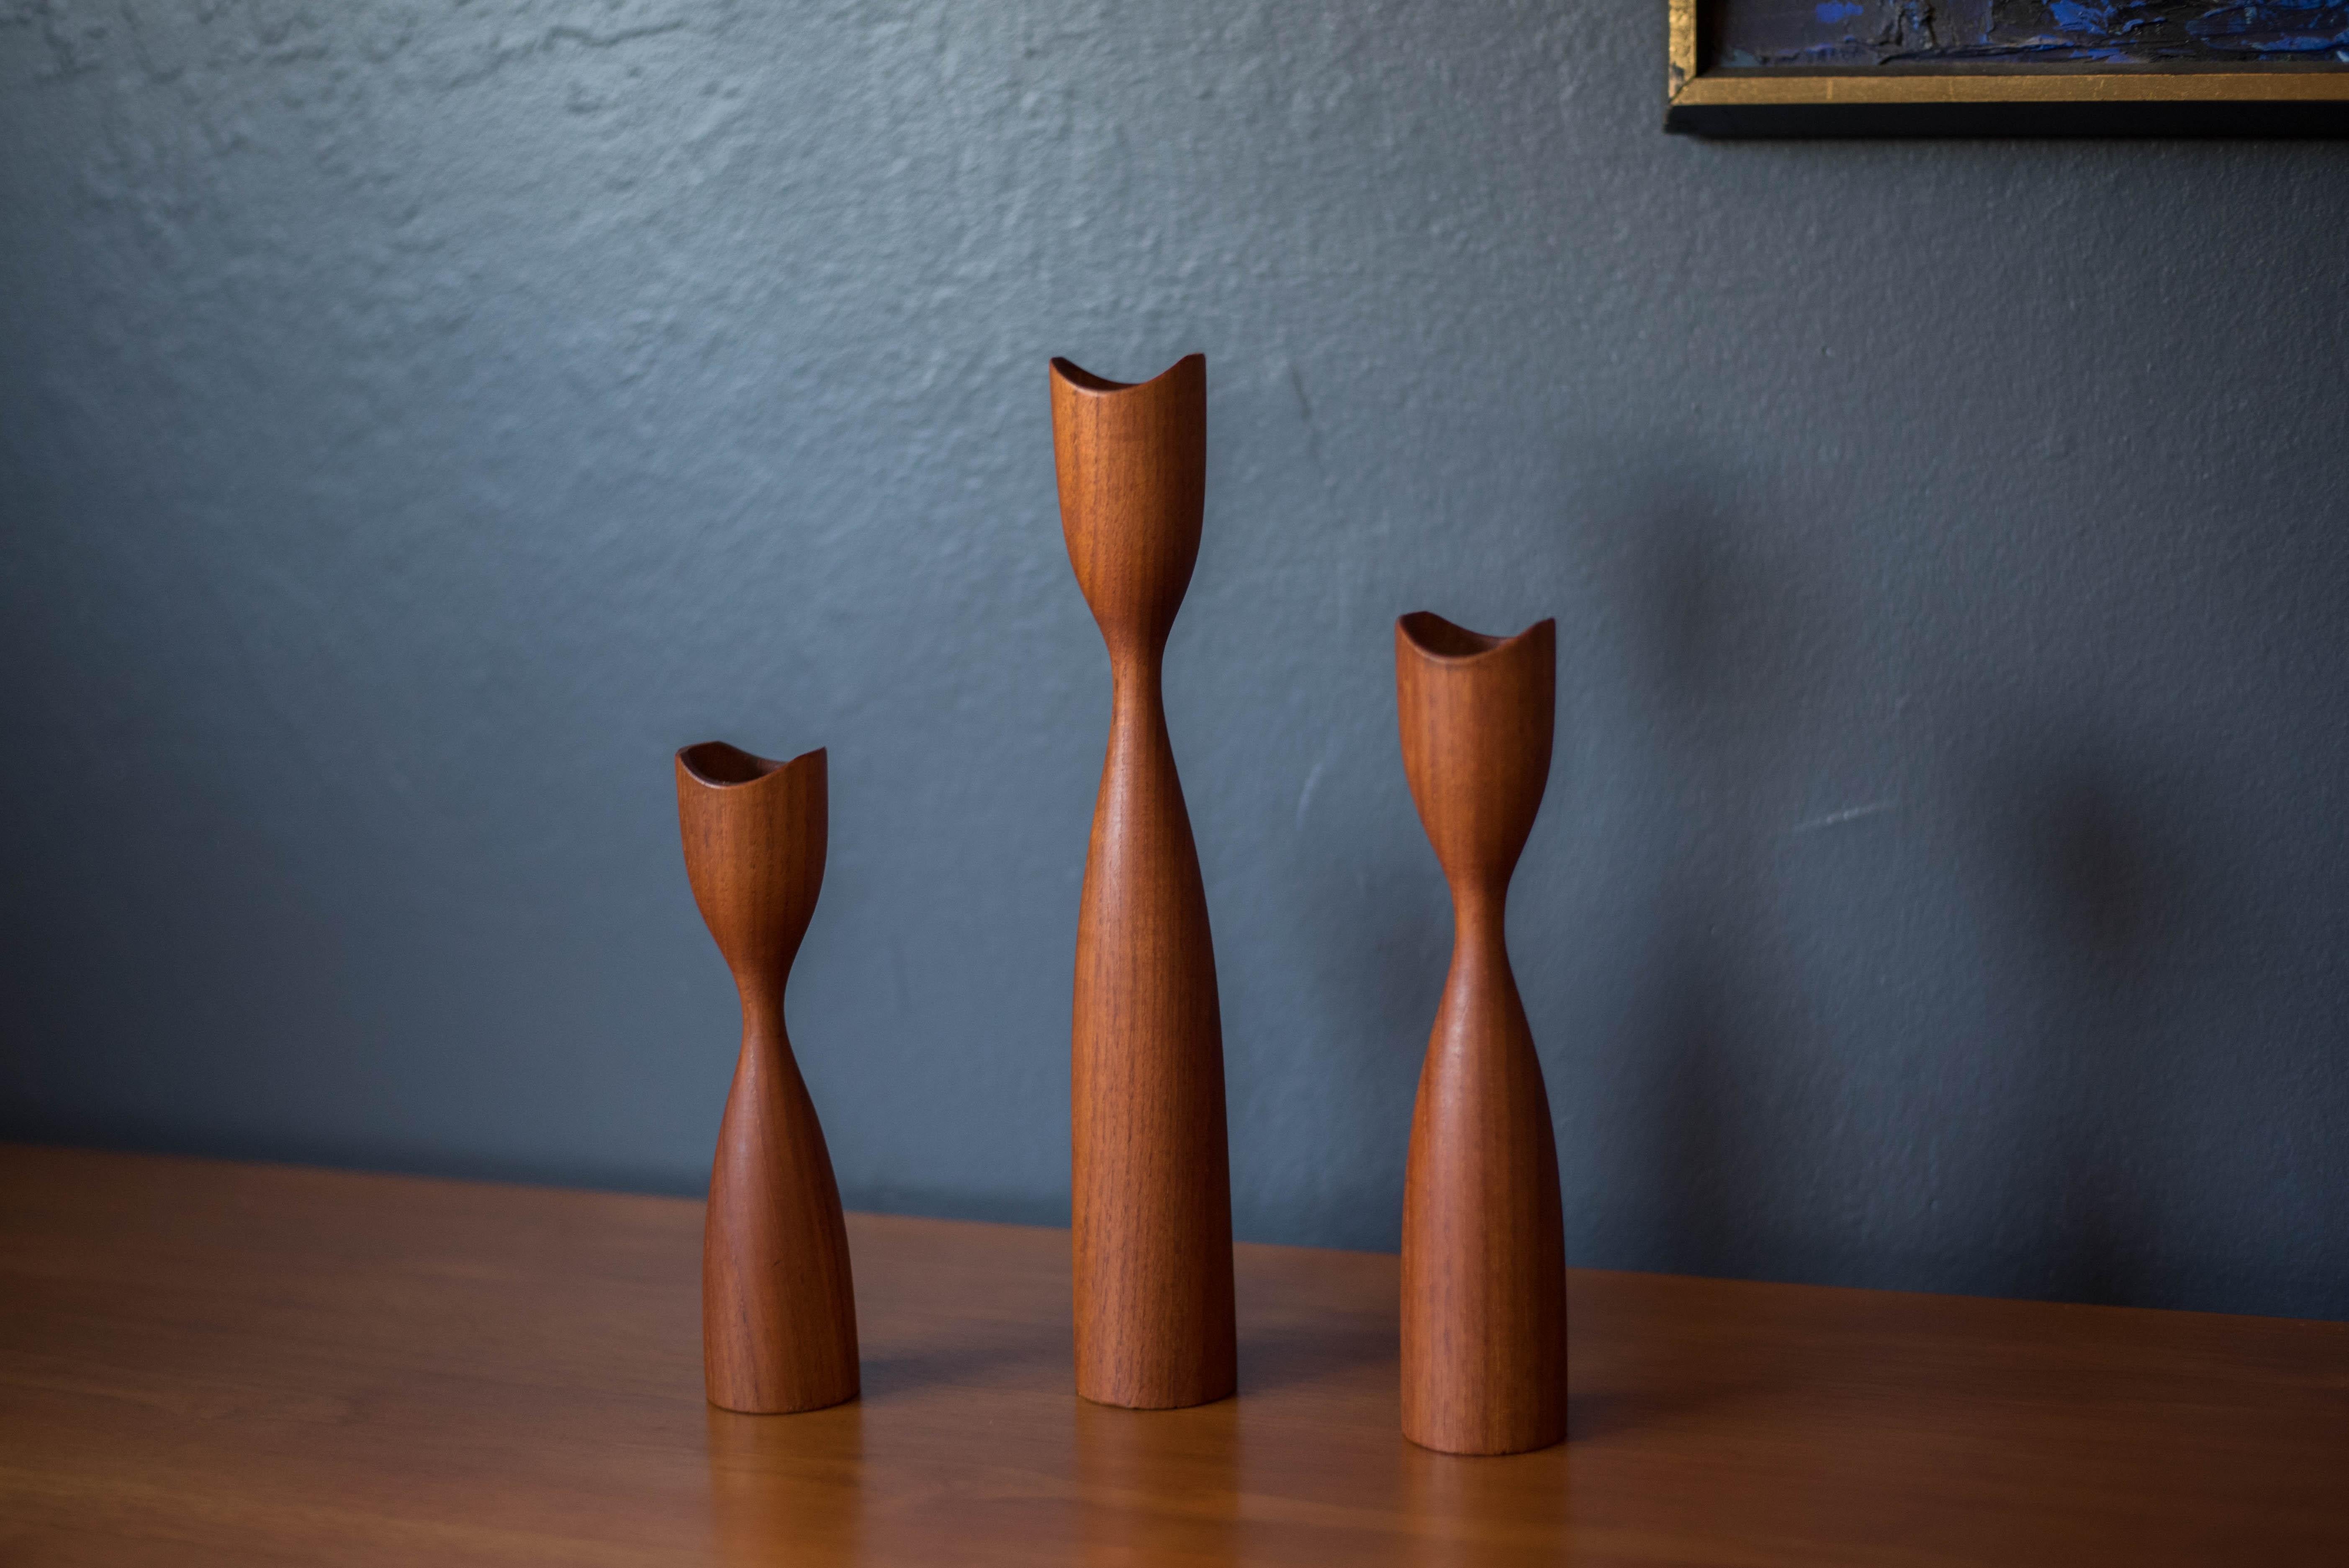 Vintage Scandinavian modern sculptural set of three teak candleholders circa 1960's. This set comes in three different sizes and displays well with any modern home decor. Fits 7/8